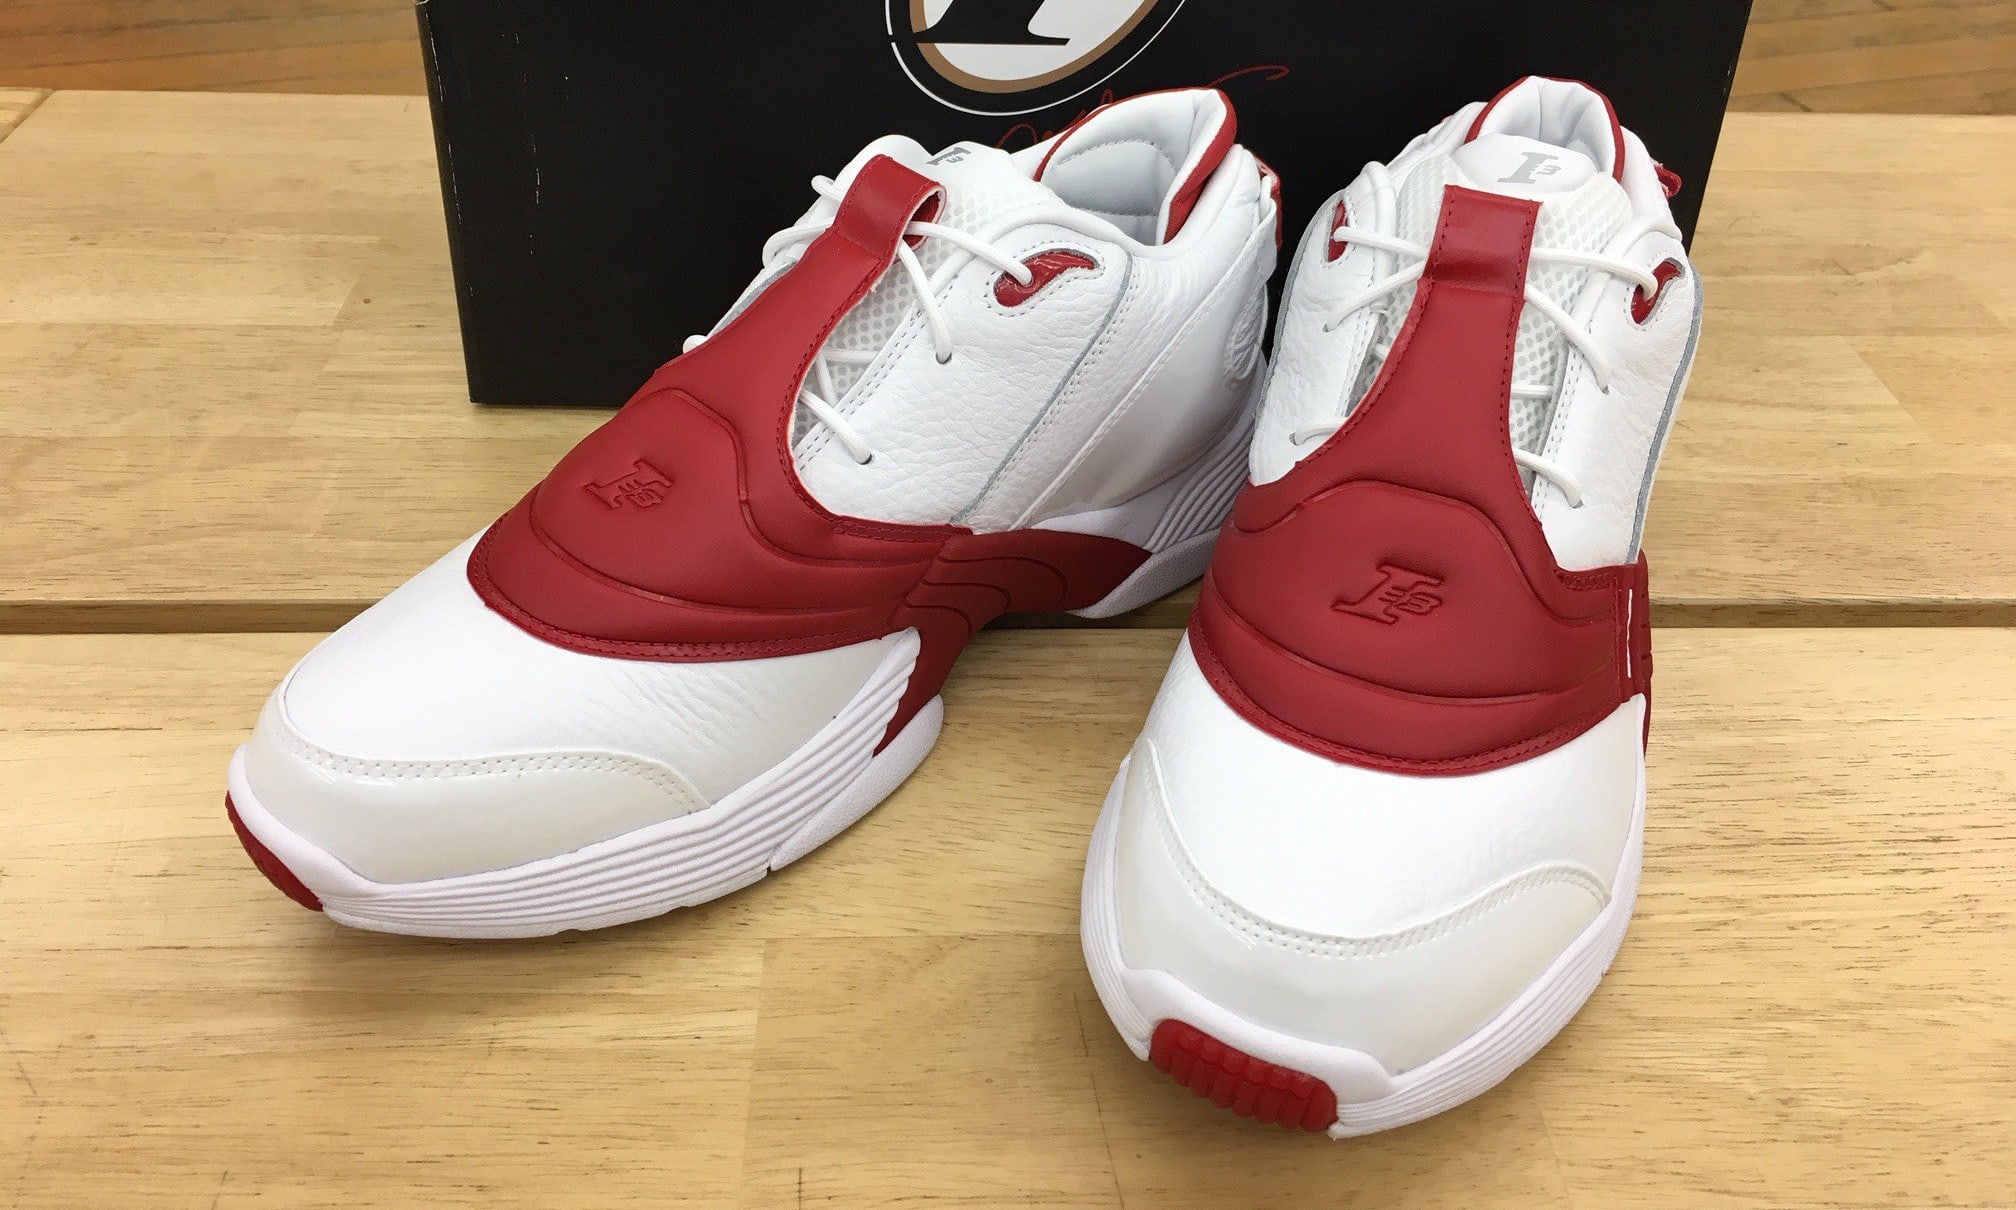 This Reebok Allen Iverson Sneaker Is Returning for the First Time Ever